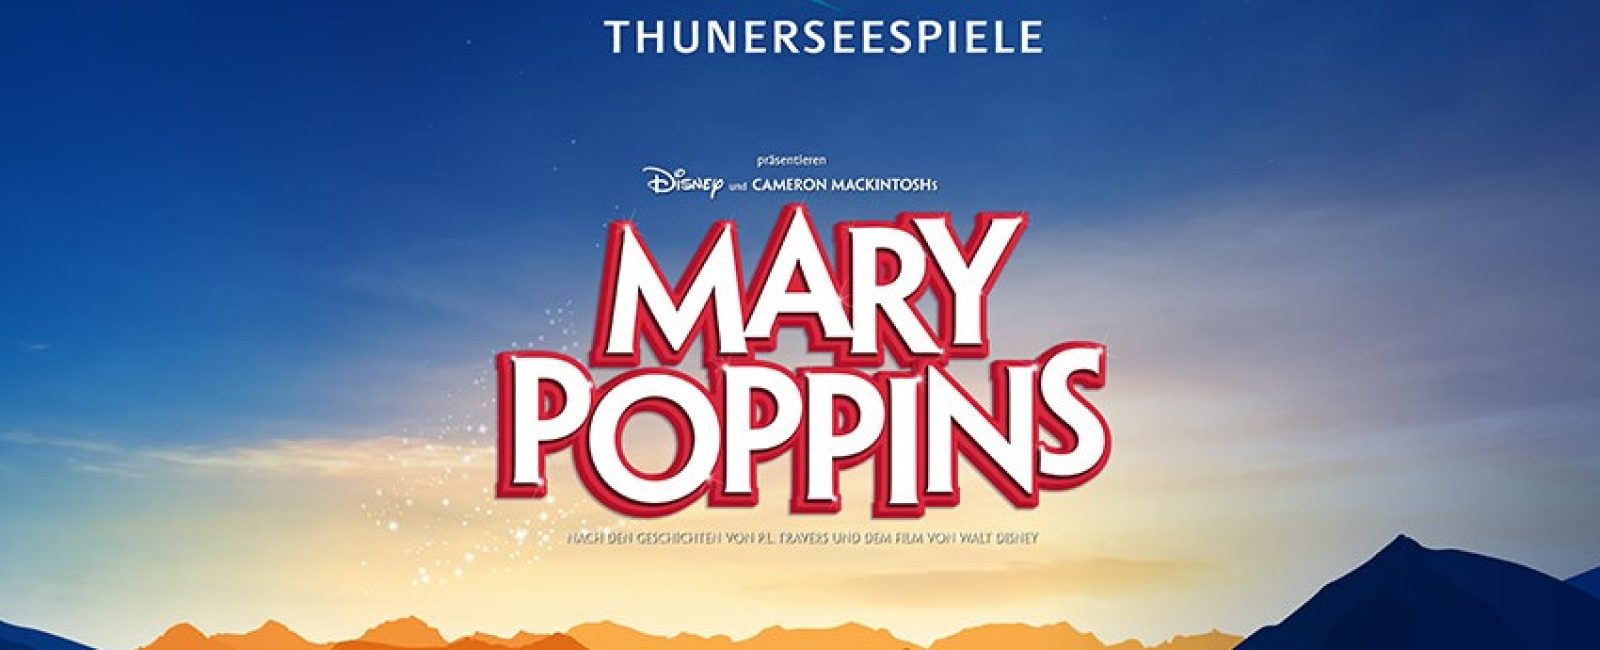 Thunerseespiele Mary Poppins